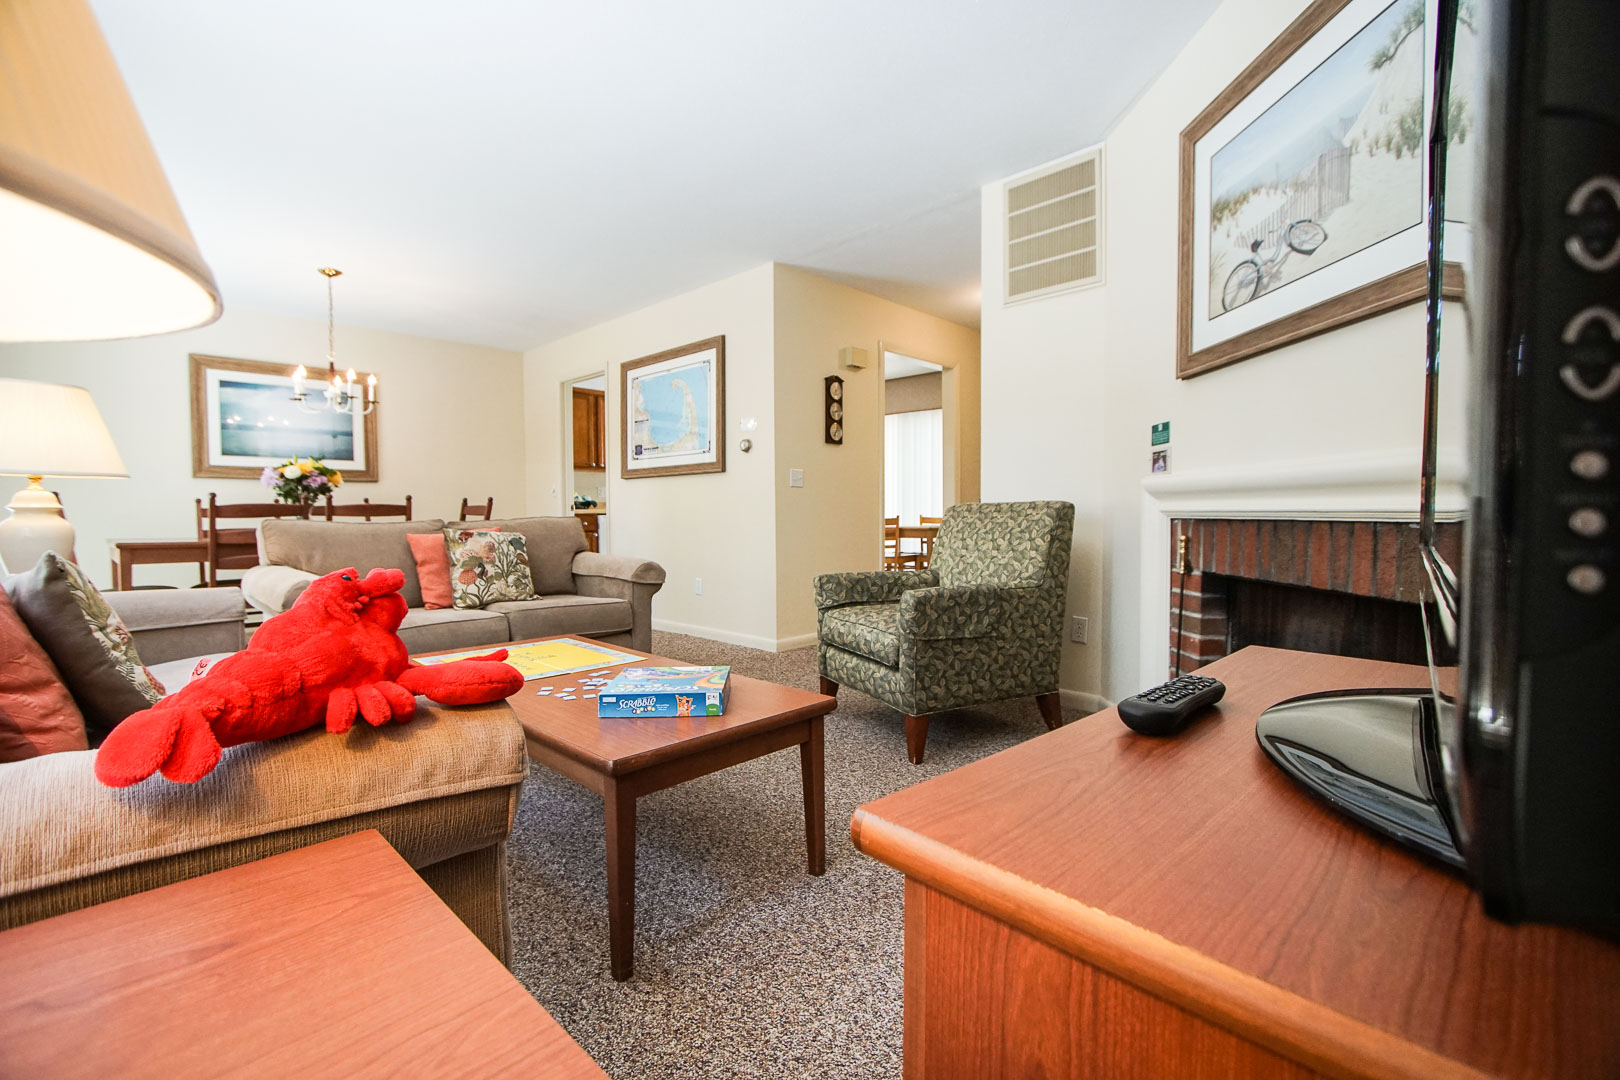 A cozy and spacious living room area at VRI's Brewster Green Resort in Massachusetts.